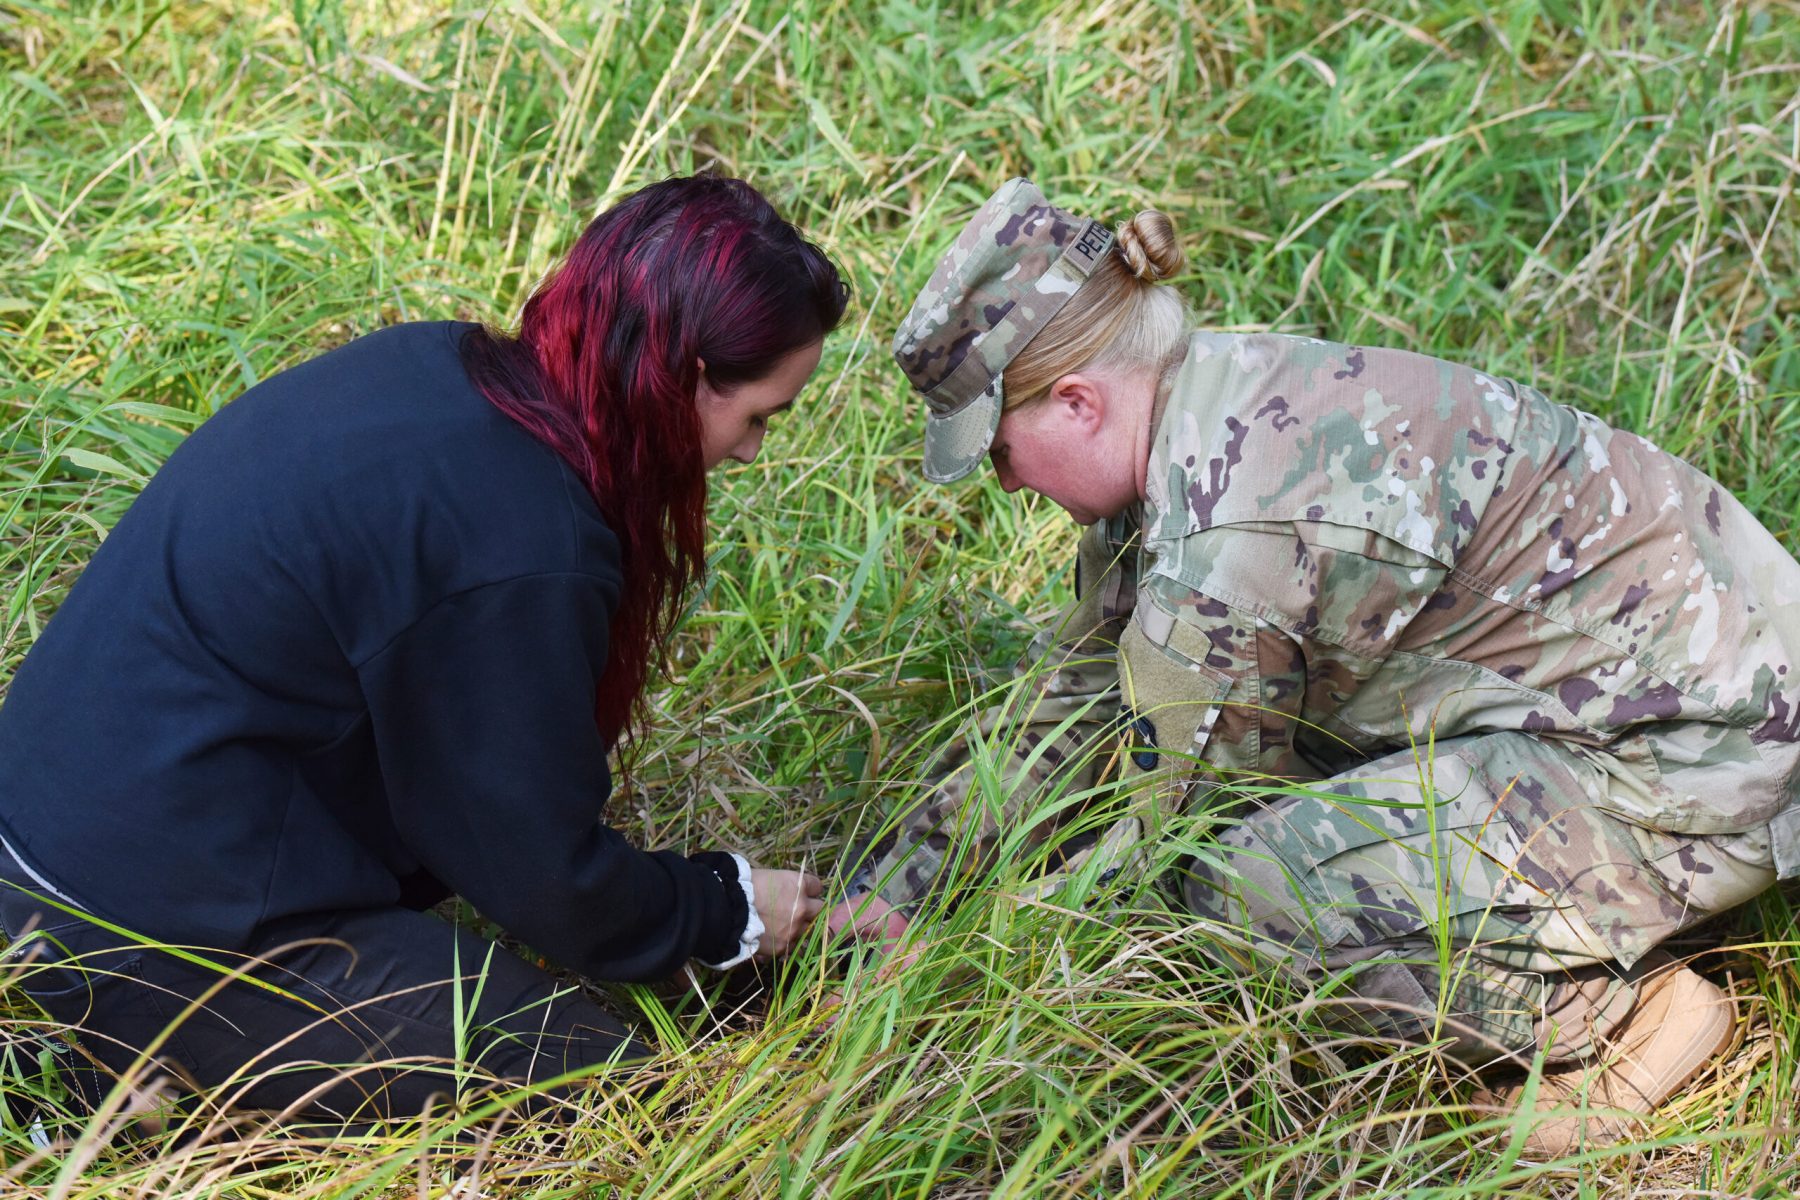 Soldiers of the Minnesota National Guard, Native American Students and Tribal Leaders gathered on Camp Ripley Sept. 20, 2019 to take part in ‘Planting for the Future’, a cultural and informational exchange to broaden inter-community perspectives and to share the experience of planting native prairie plants.